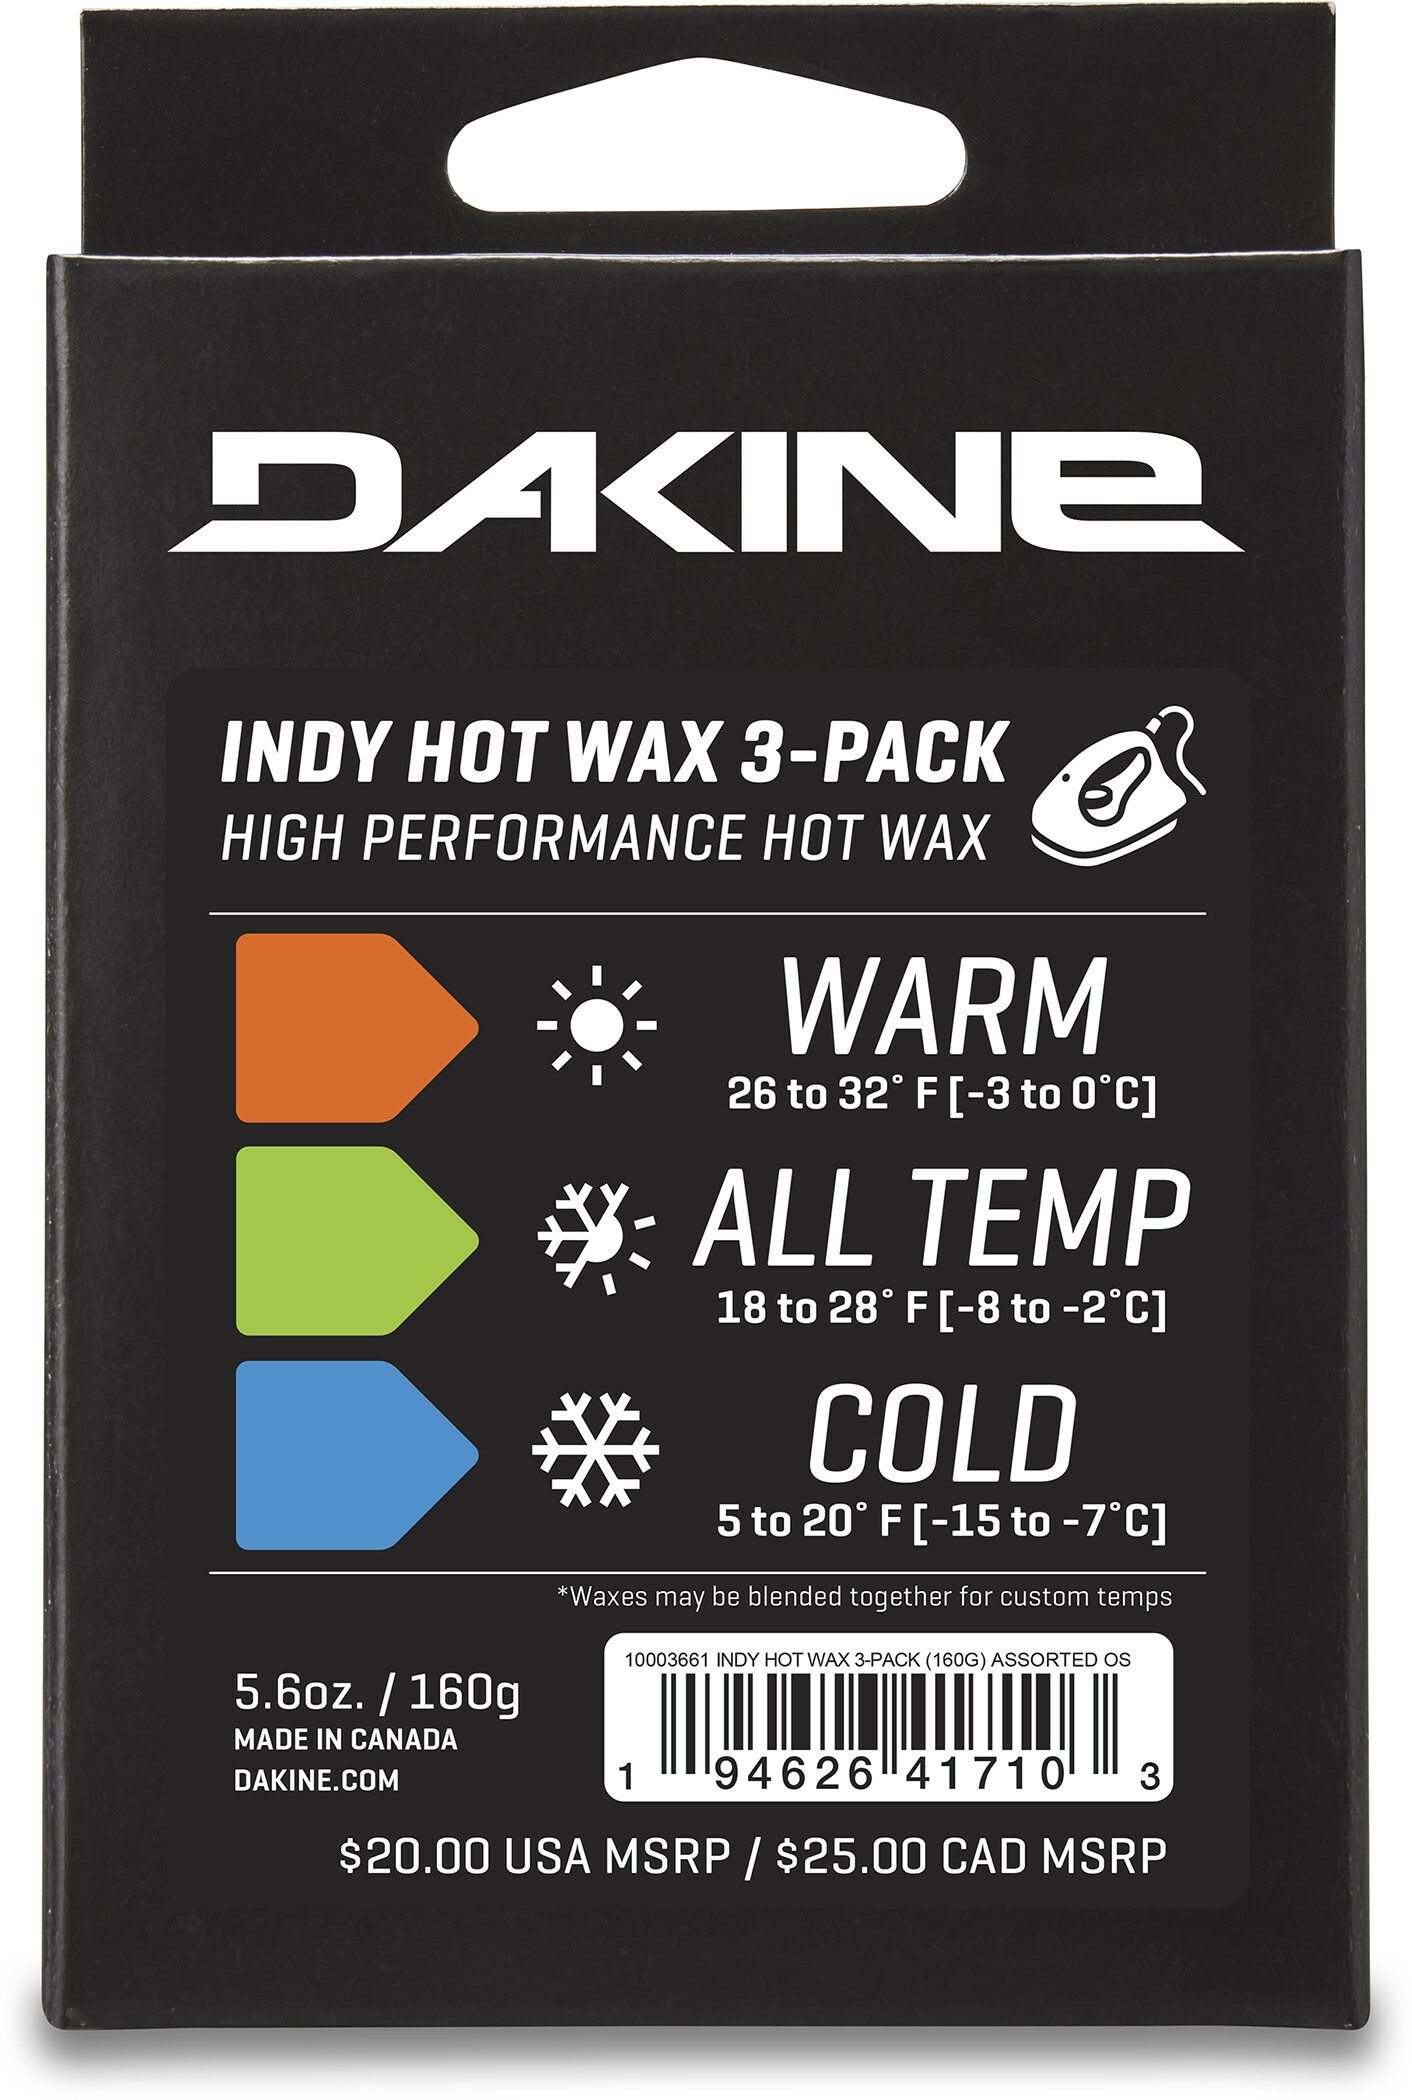 INDY HOT WAX 3-PACK